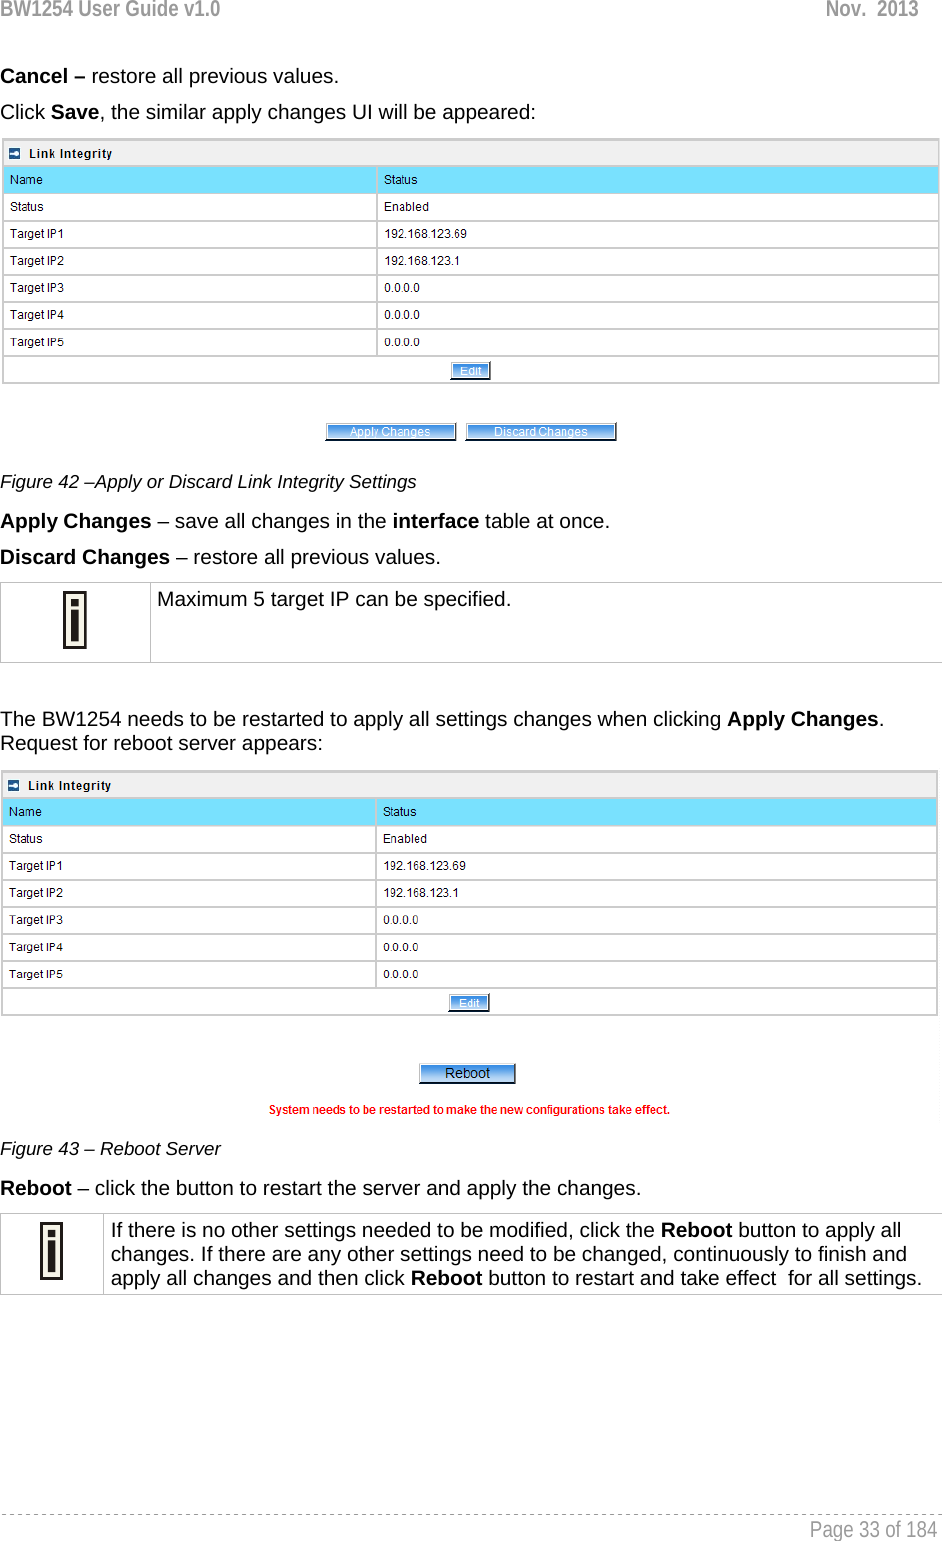 BW1254 User Guide v1.0  Nov.  2013     Page 33 of 184   Cancel – restore all previous values. Click Save, the similar apply changes UI will be appeared:  Figure 42 –Apply or Discard Link Integrity Settings Apply Changes – save all changes in the interface table at once. Discard Changes – restore all previous values.  Maximum 5 target IP can be specified.  The BW1254 needs to be restarted to apply all settings changes when clicking Apply Changes. Request for reboot server appears:  Figure 43 – Reboot Server Reboot – click the button to restart the server and apply the changes.  If there is no other settings needed to be modified, click the Reboot button to apply all changes. If there are any other settings need to be changed, continuously to finish and apply all changes and then click Reboot button to restart and take effect  for all settings.     